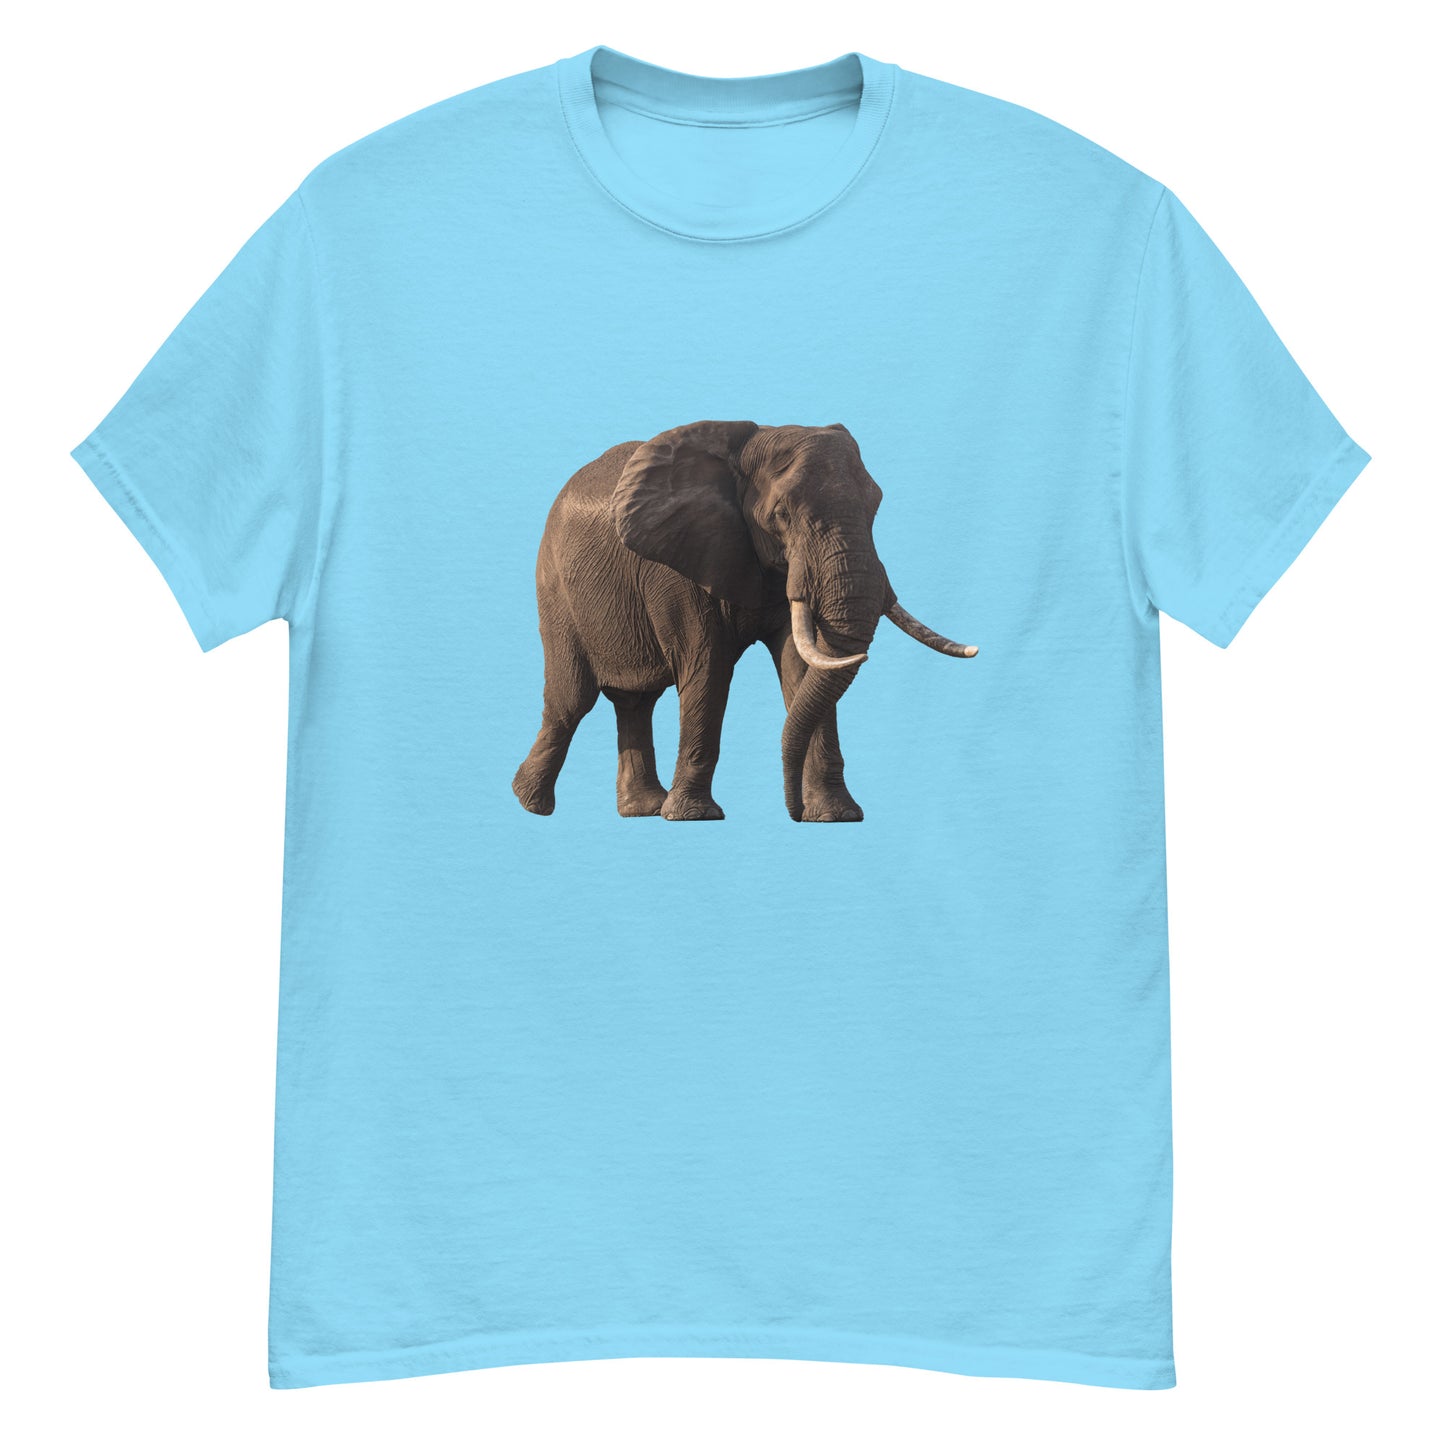 Mens T-shirt  printed with a Bull Elephant